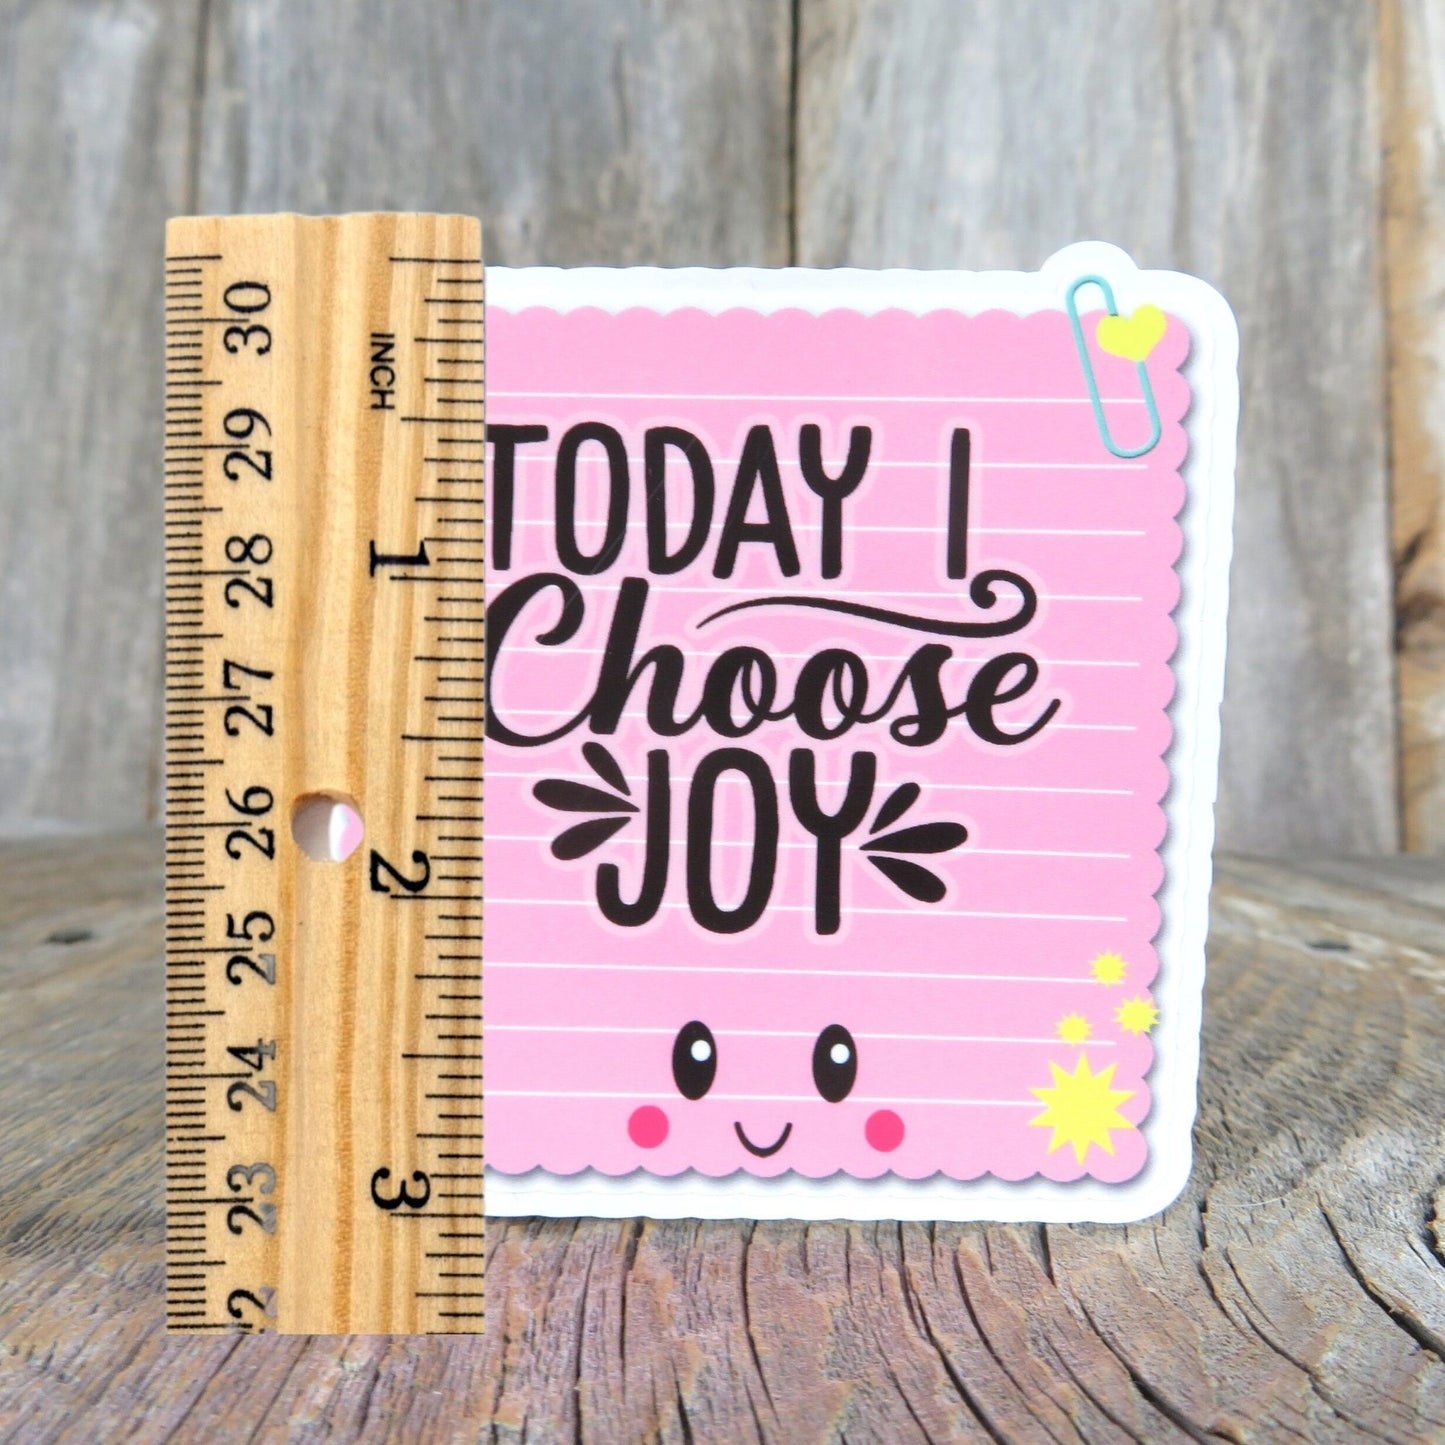 Today I Choose Joy Sticker Kawaii Post It Note Waterproof Pink Full Color Positive Saying